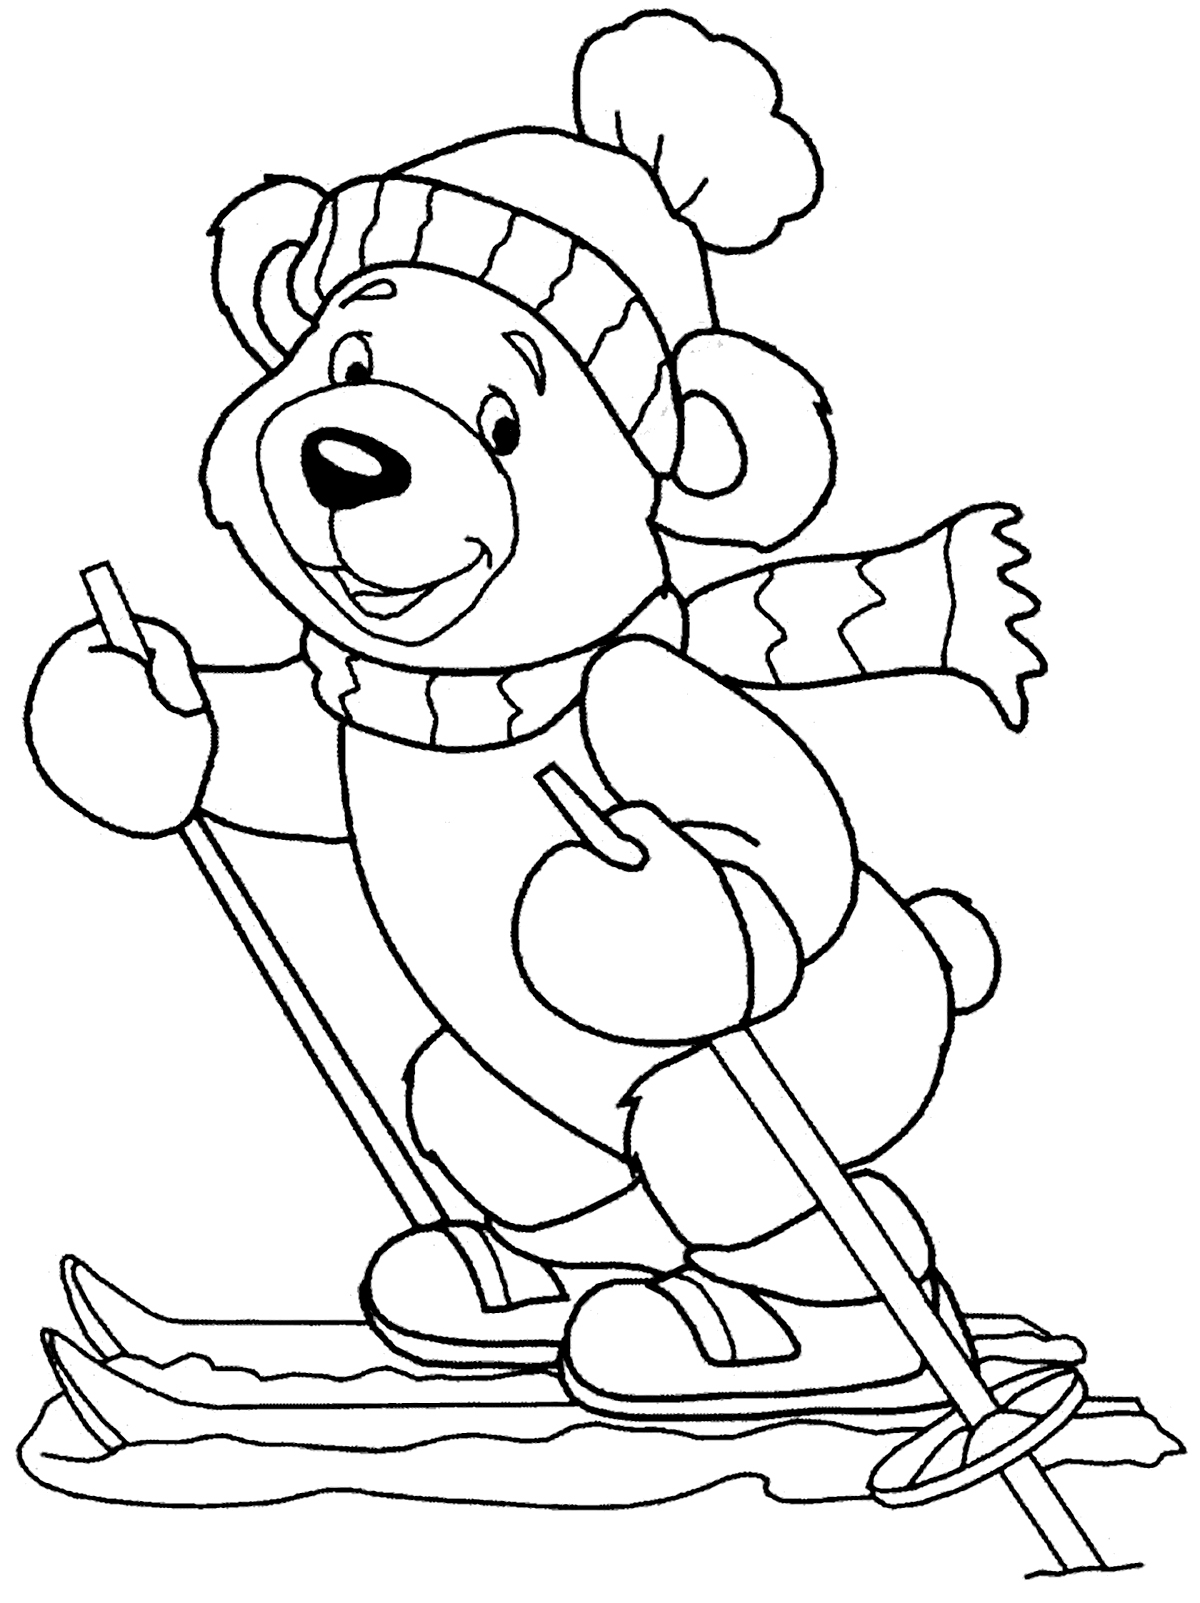 Go skiing with this cute little bear!